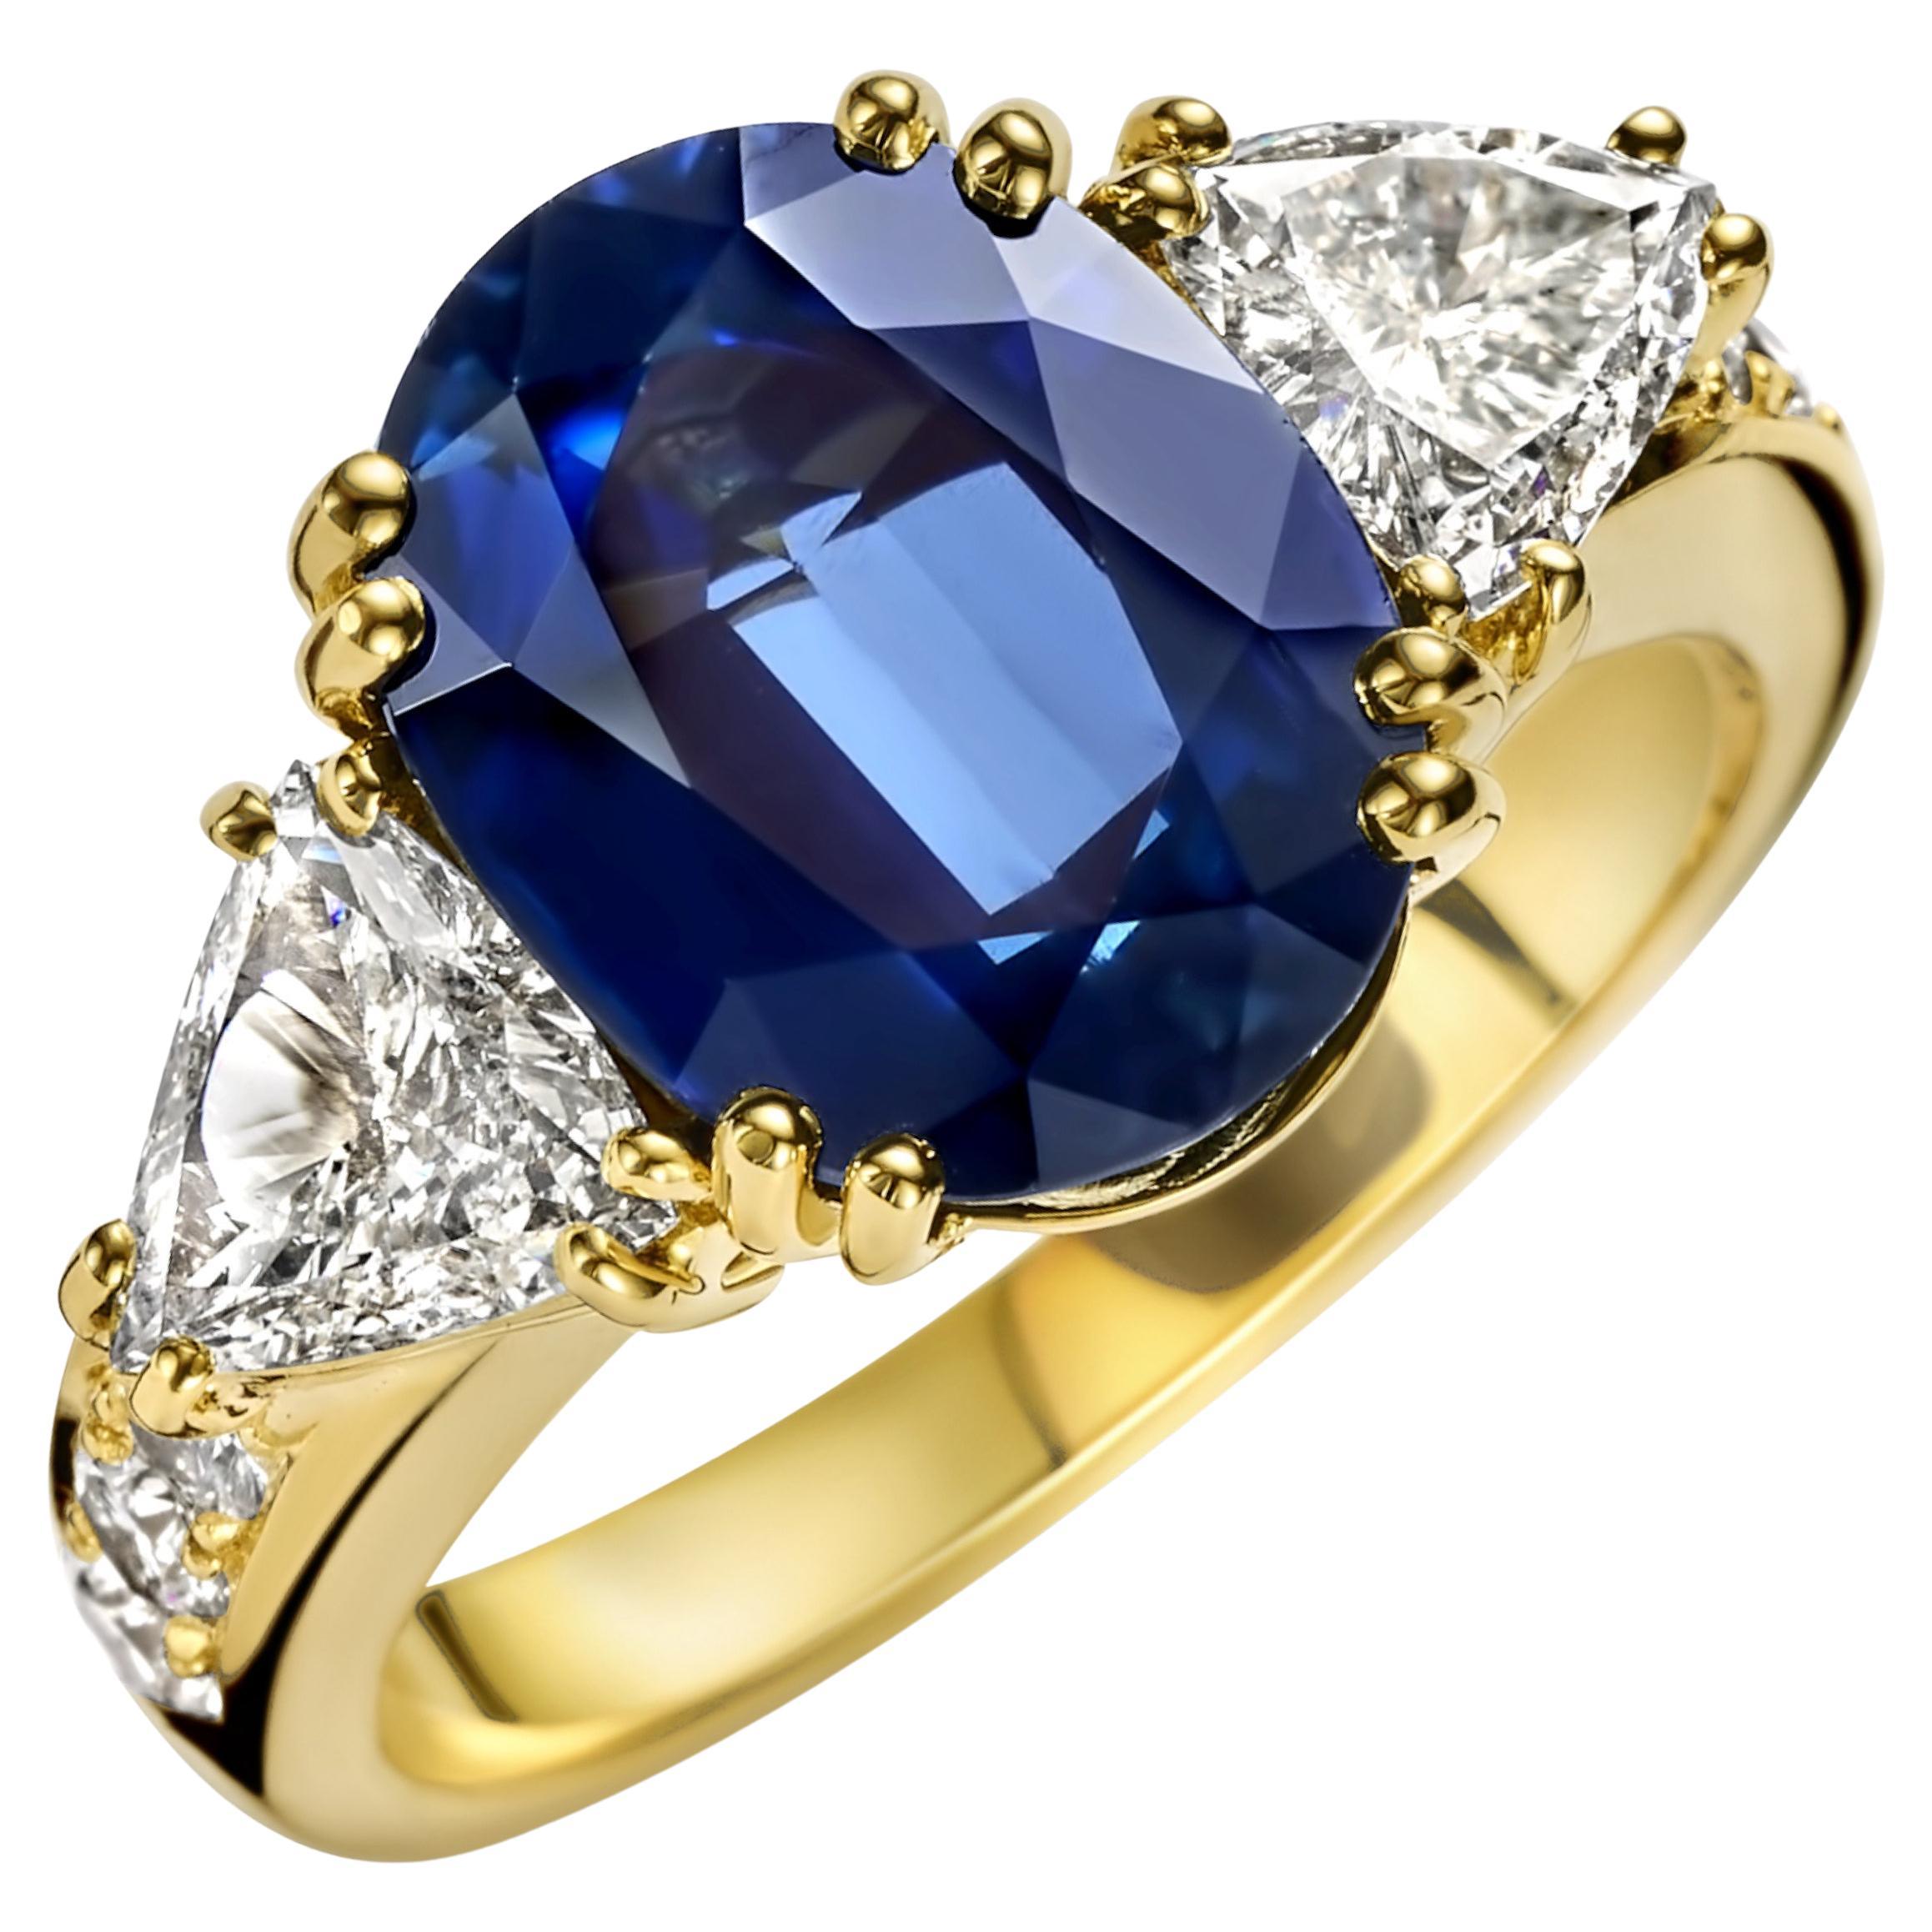 18kt Yellow Gold Ring with Beautiful 6.68ct Sapphire & 1.07ct Triangle Diamonds For Sale